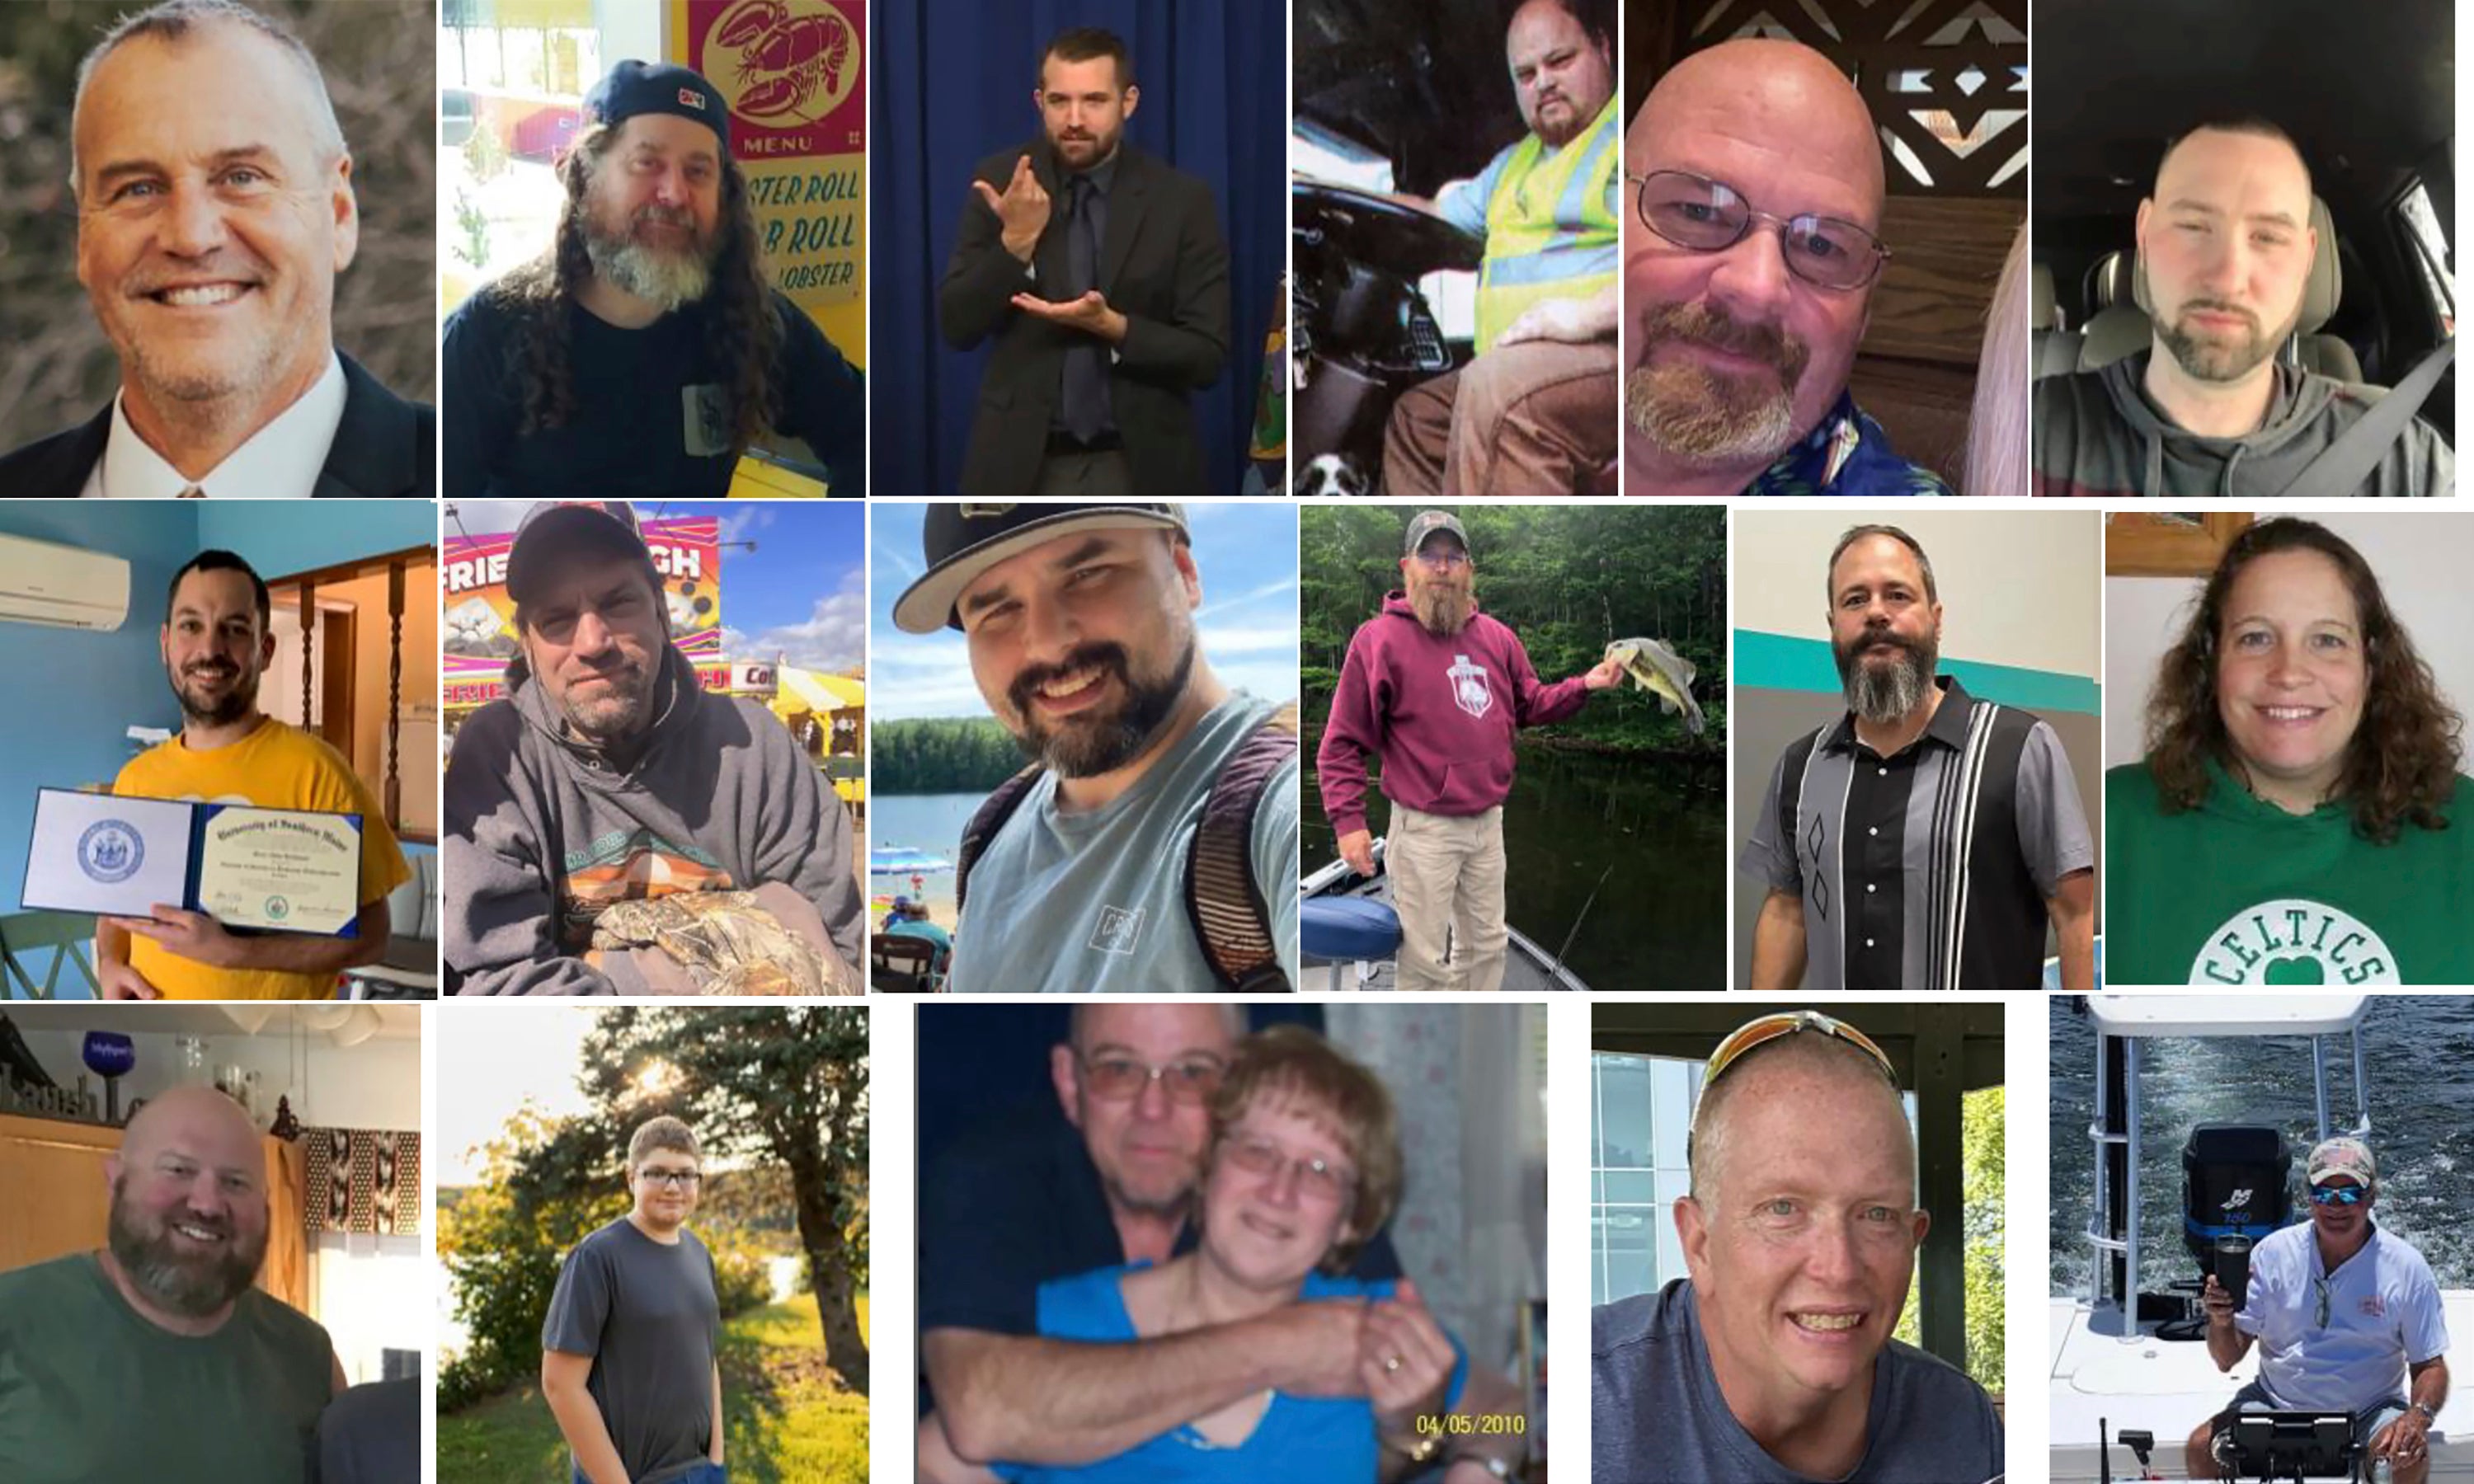 The Maine shooting victims